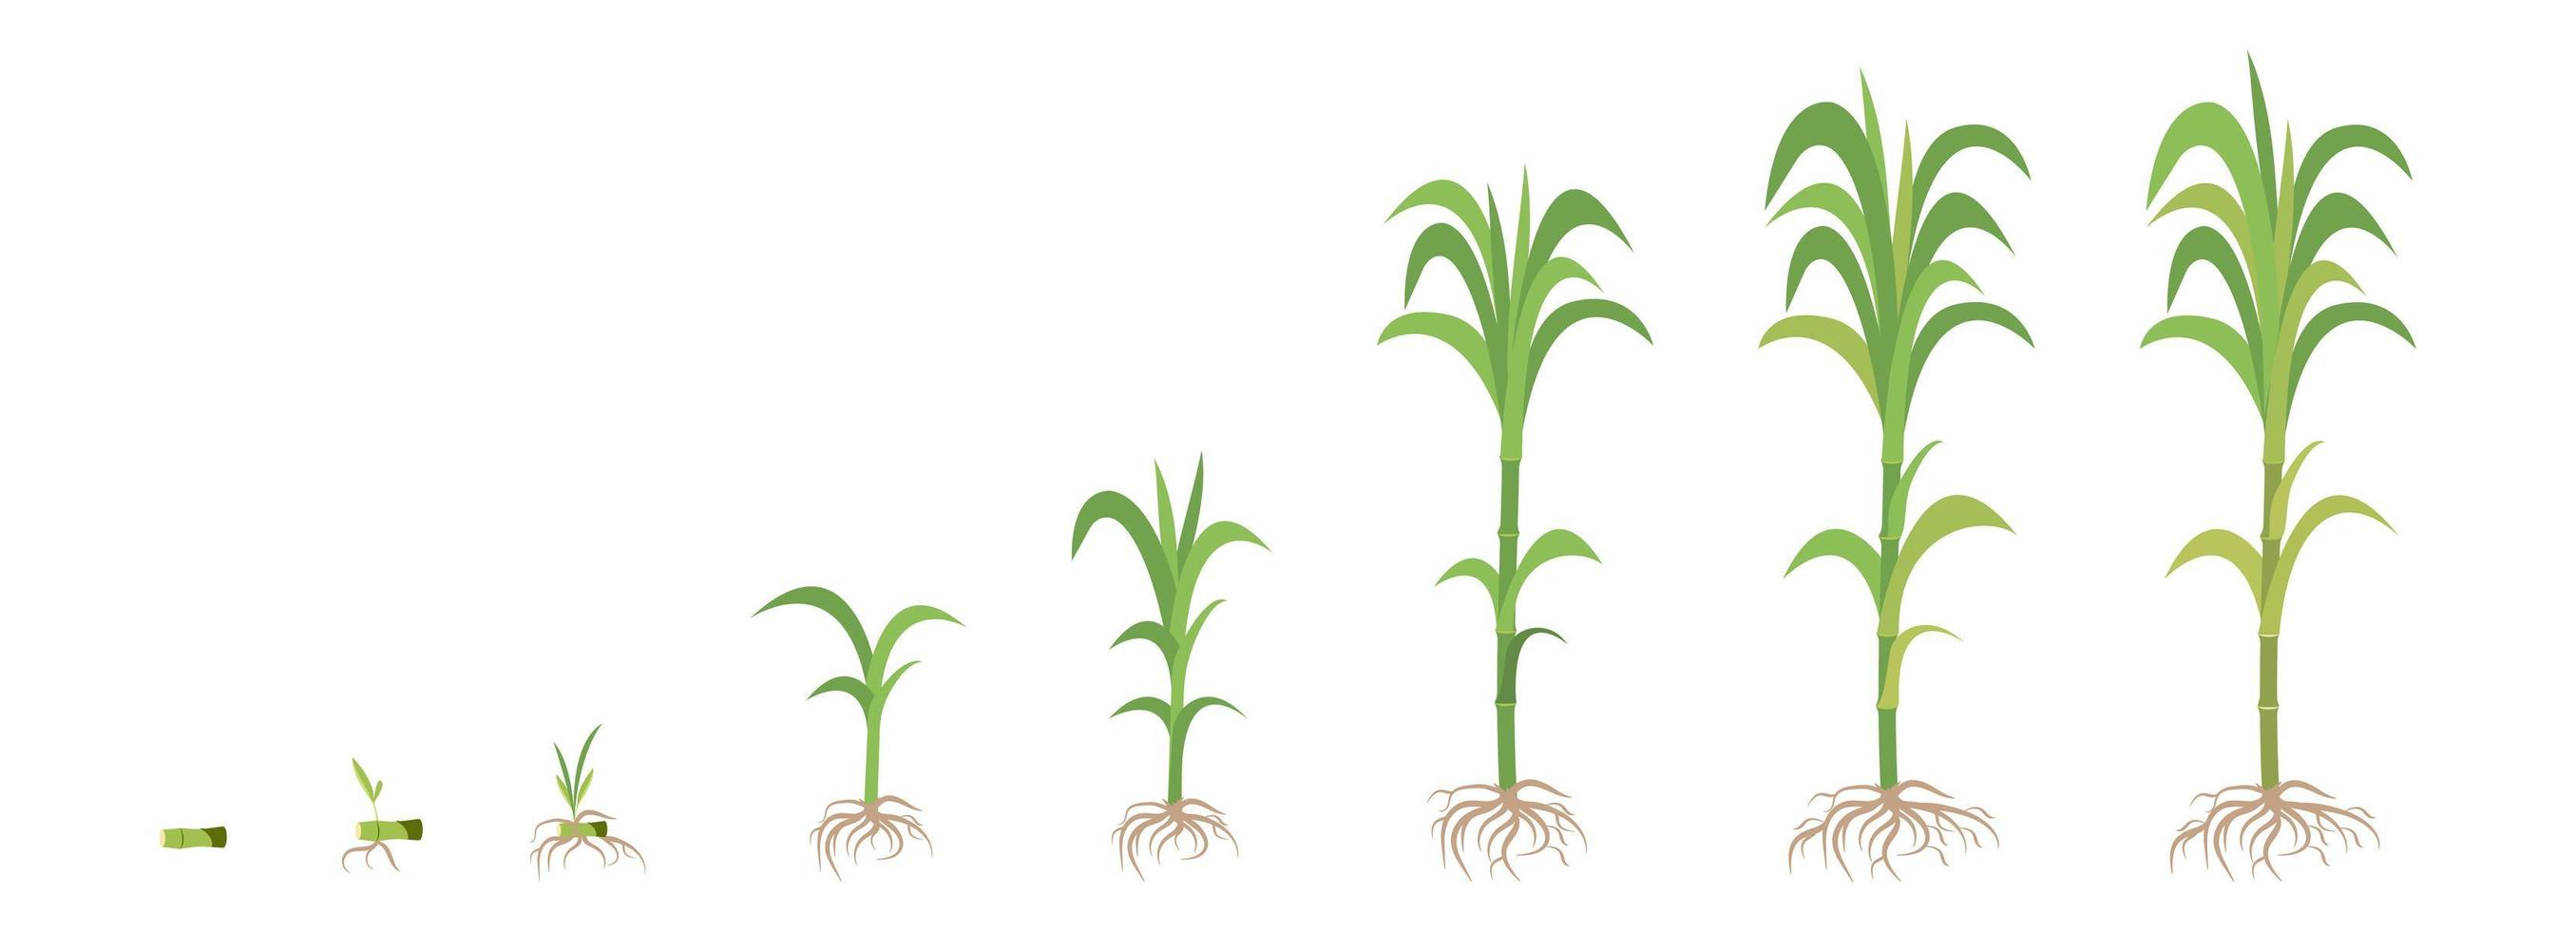 Crop growth phases of Sugarcane from planting to maturity. vector